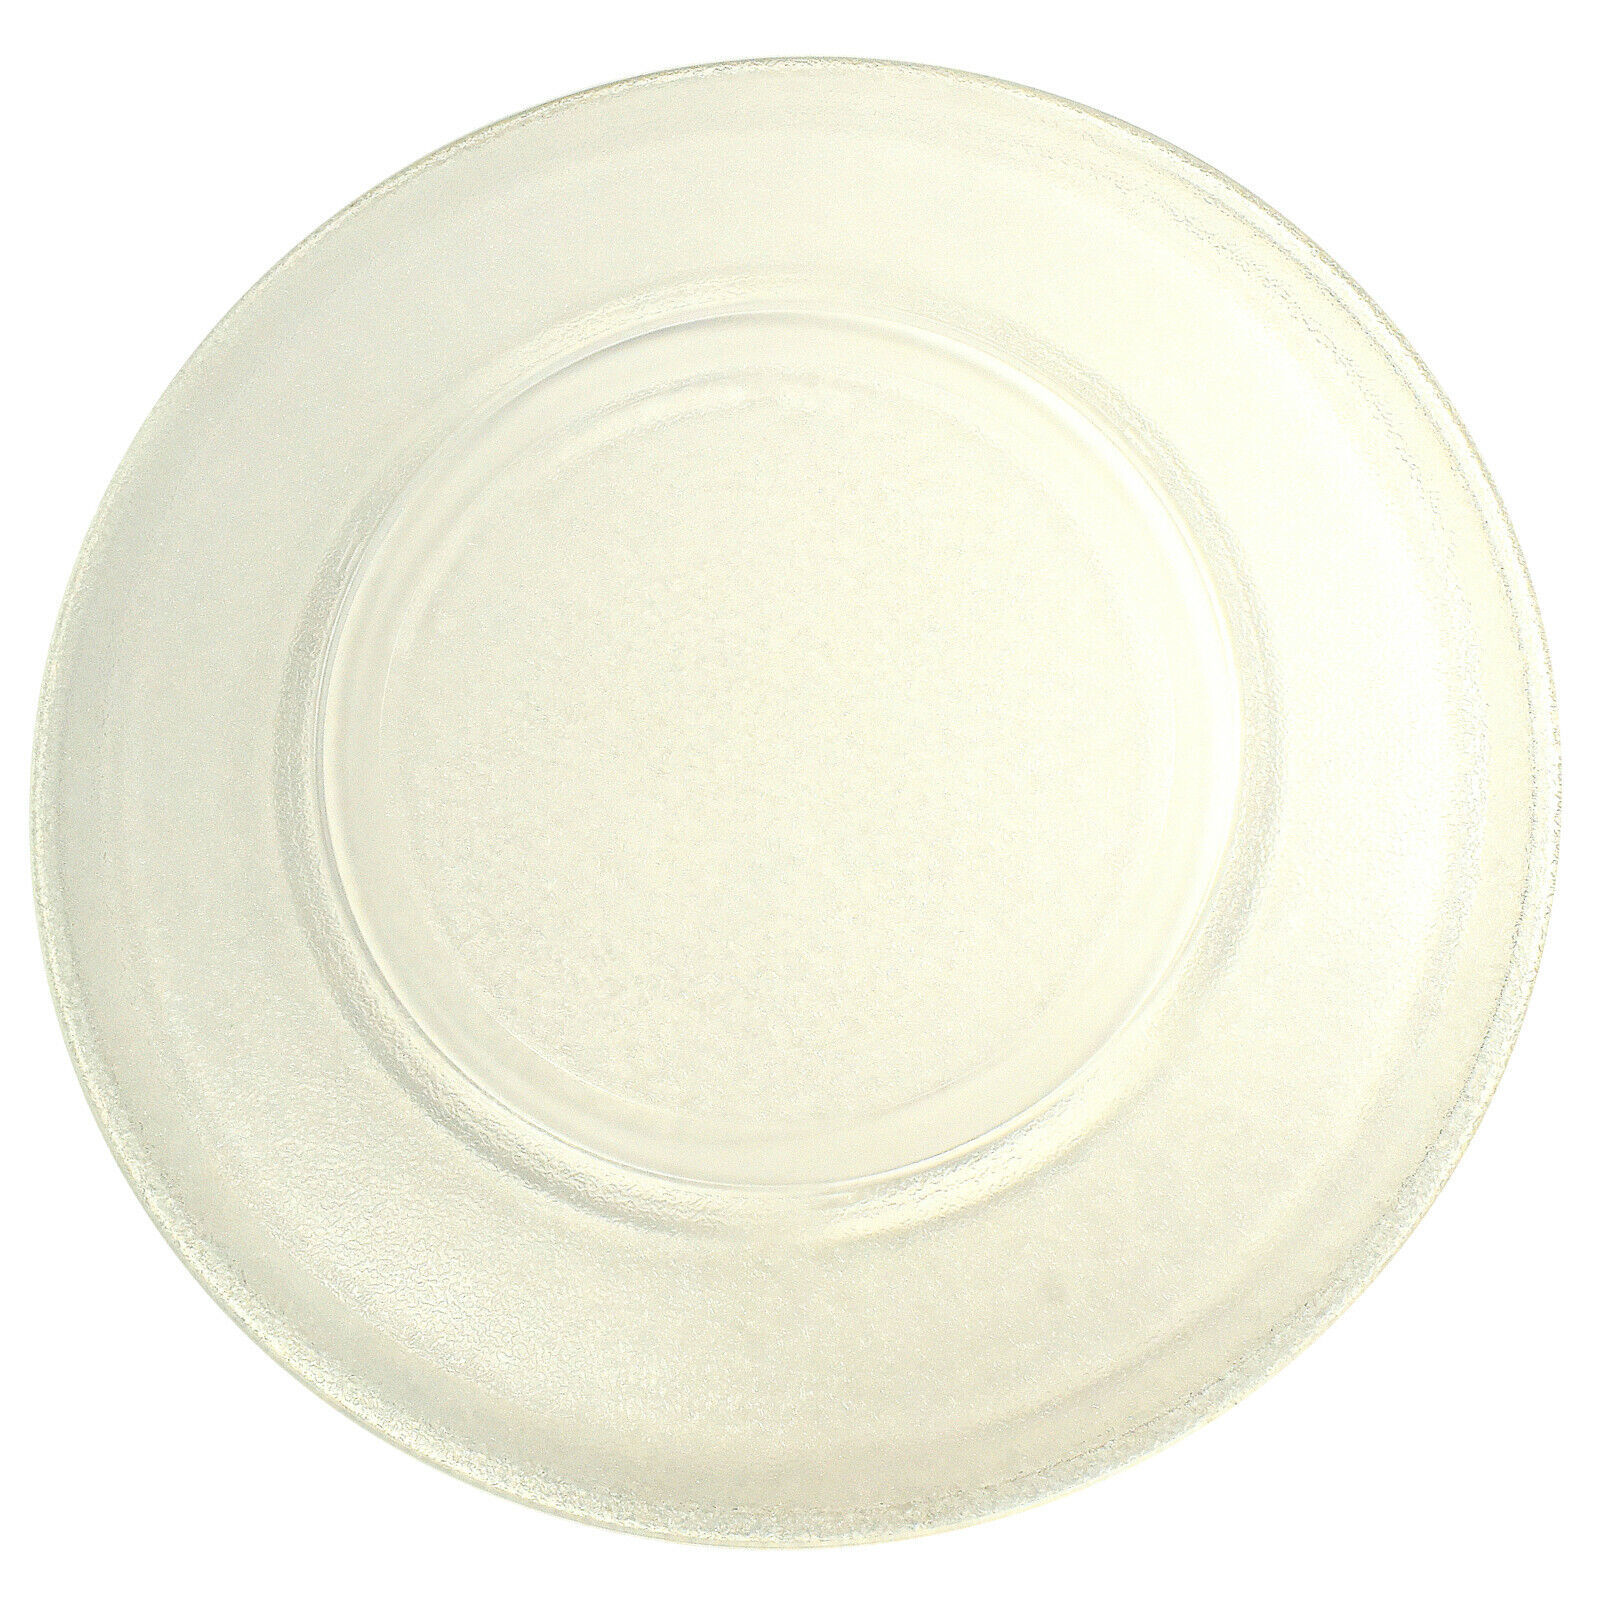 16" Glass Turntable Tray for LG 3390W1G006B Microwave Oven Cooking Plate 406mm - $90.99